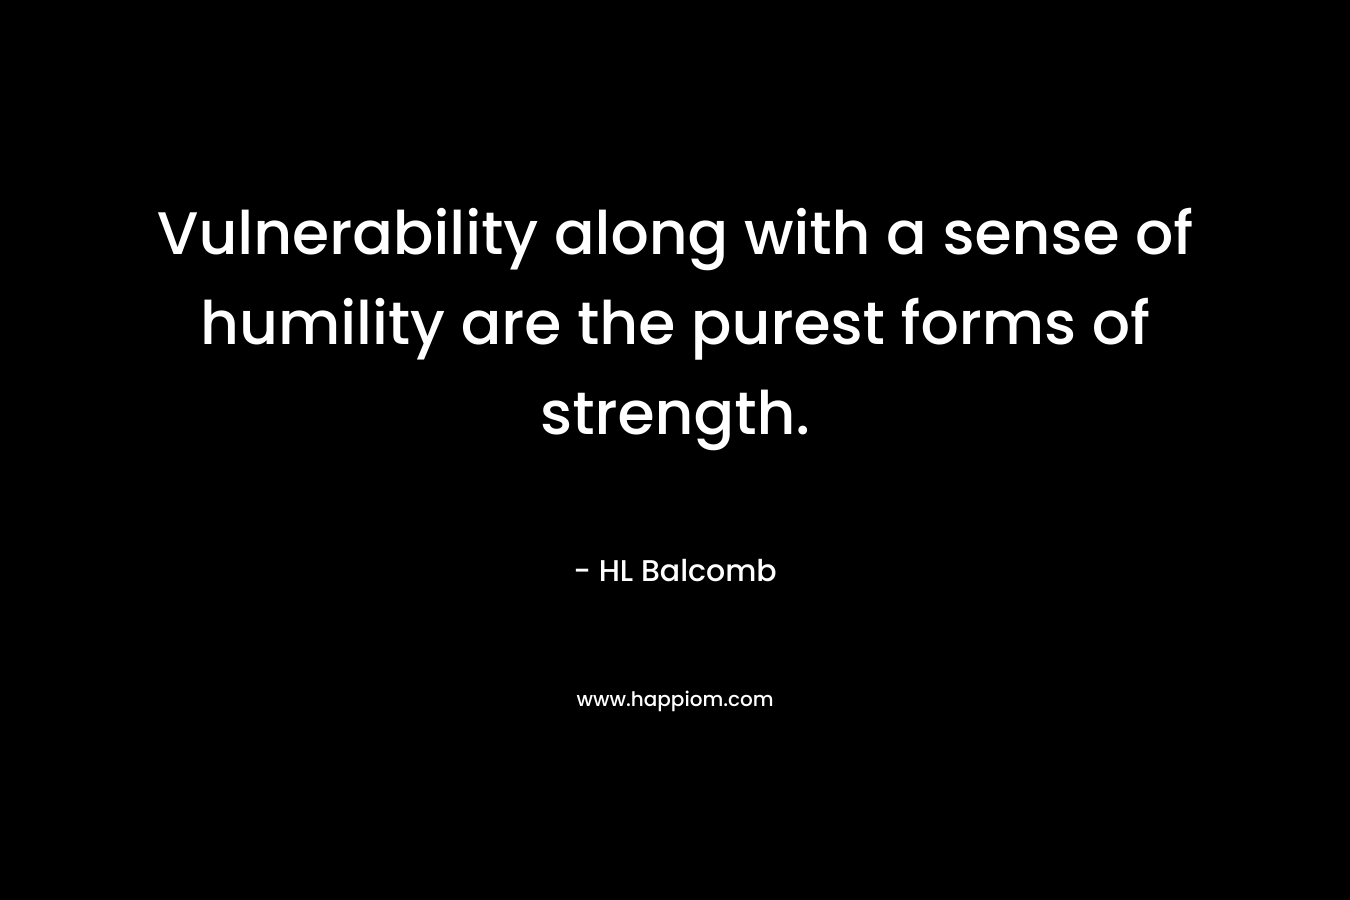 Vulnerability along with a sense of humility are the purest forms of strength. – HL Balcomb